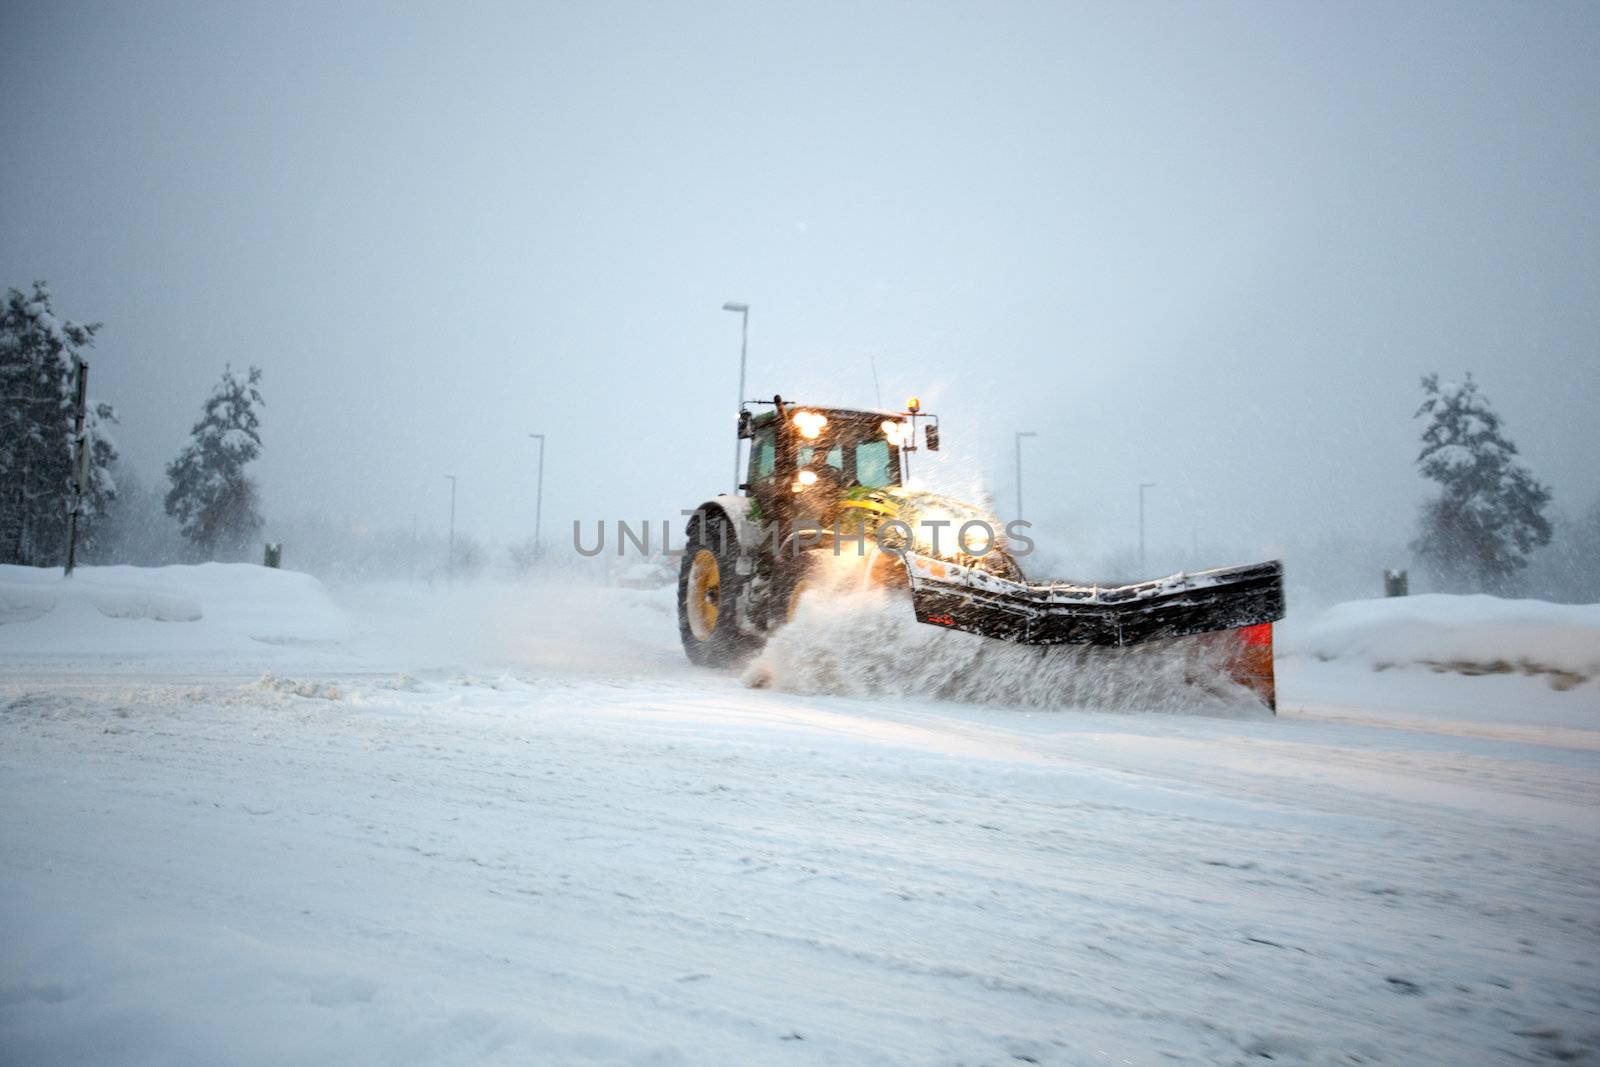 A snow plow clearing a road in winter